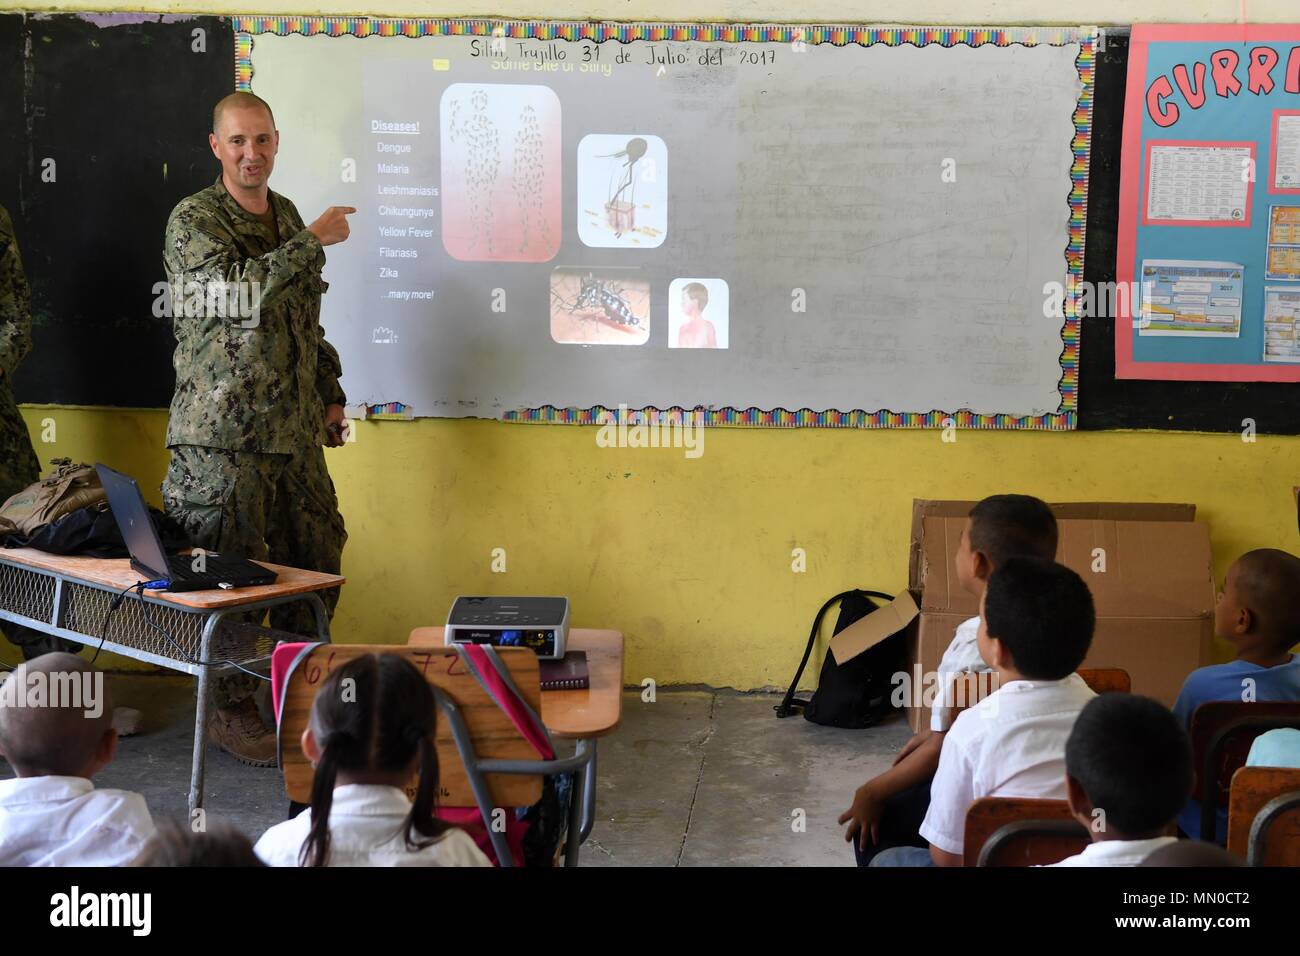 170801-N-BK435-0121 SILIN, Honduras (Aug. 1, 2017) Lt. Cmdr. Ian Sutherland, technical director for the Navy Entomology Center of Excellence, teaches an entomology class for 78 children at República de Colombia Elementary School during a Southern Partnership Station 17 community relations project (COMREL). SPS-EPF 17 is a U.S. Navy deployment, executed by U.S. Naval Forces Southern Command/U.S. 4th Fleet, focused on subject matter expert exchanges with partner nation militaries and security forces in Central and South America. (U.S. Navy photo by Mass Communication Specialist 1st Class Jeremy  Stock Photo